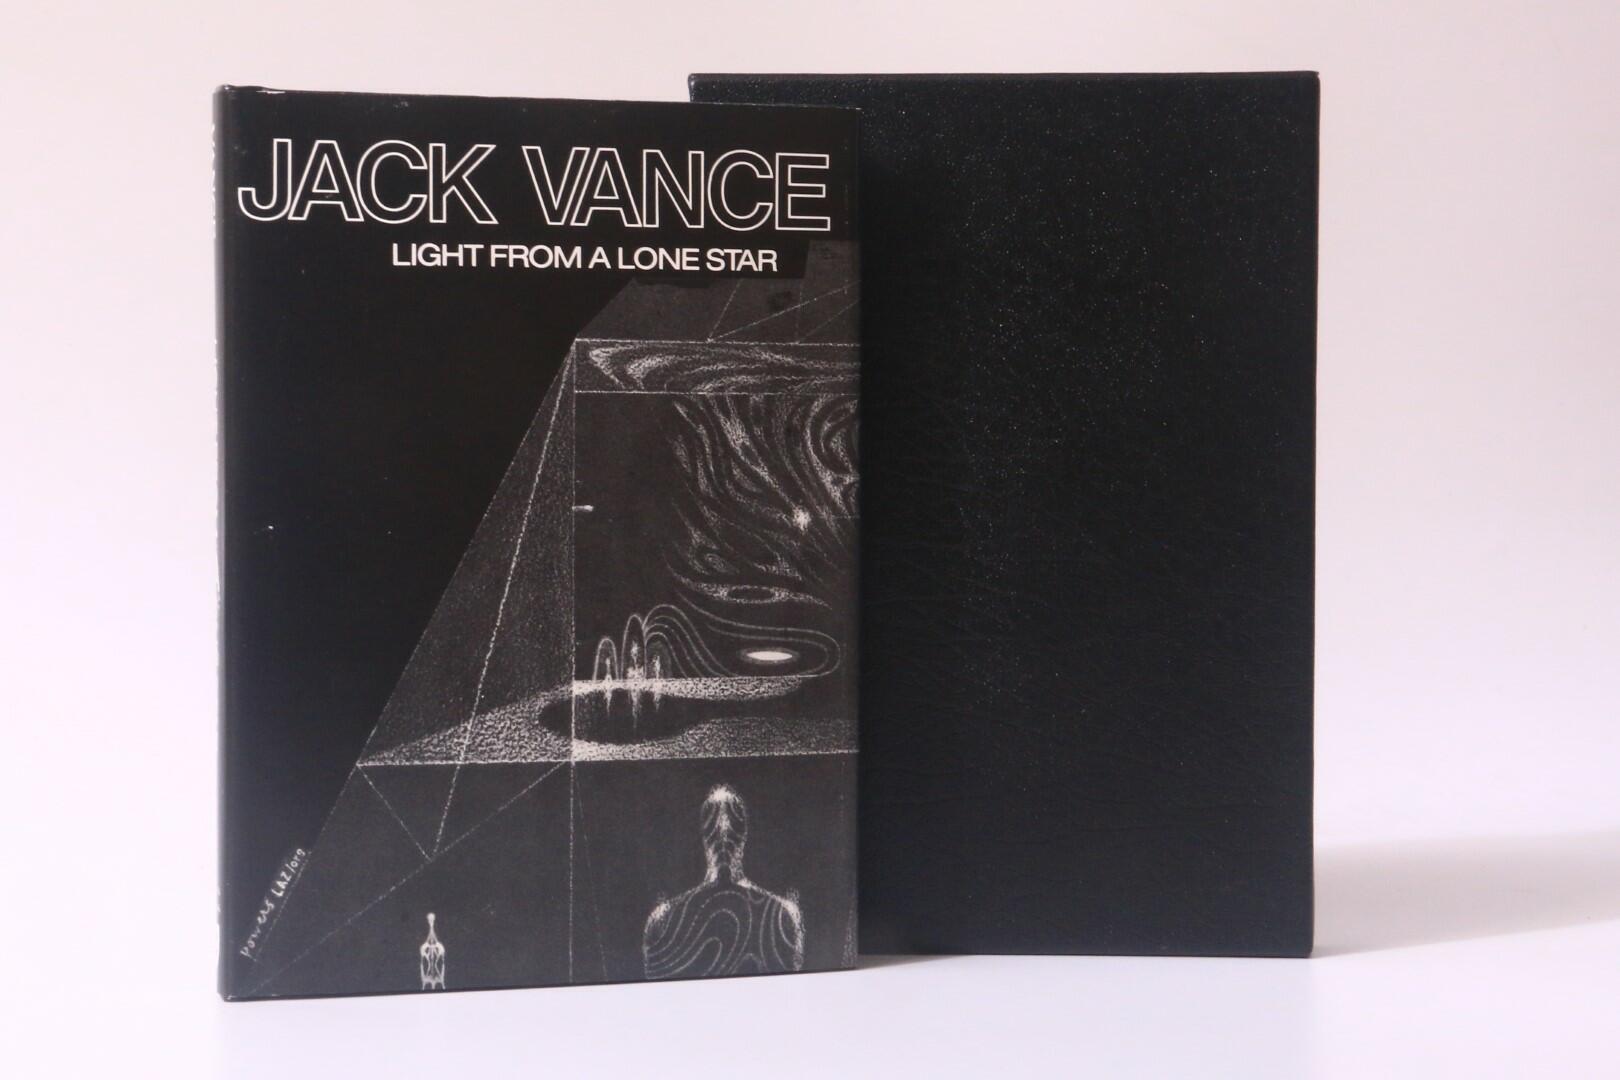 Jack Vance - Light from a Lone Star - Nesfa Press, 1985, Signed Limited Edition.